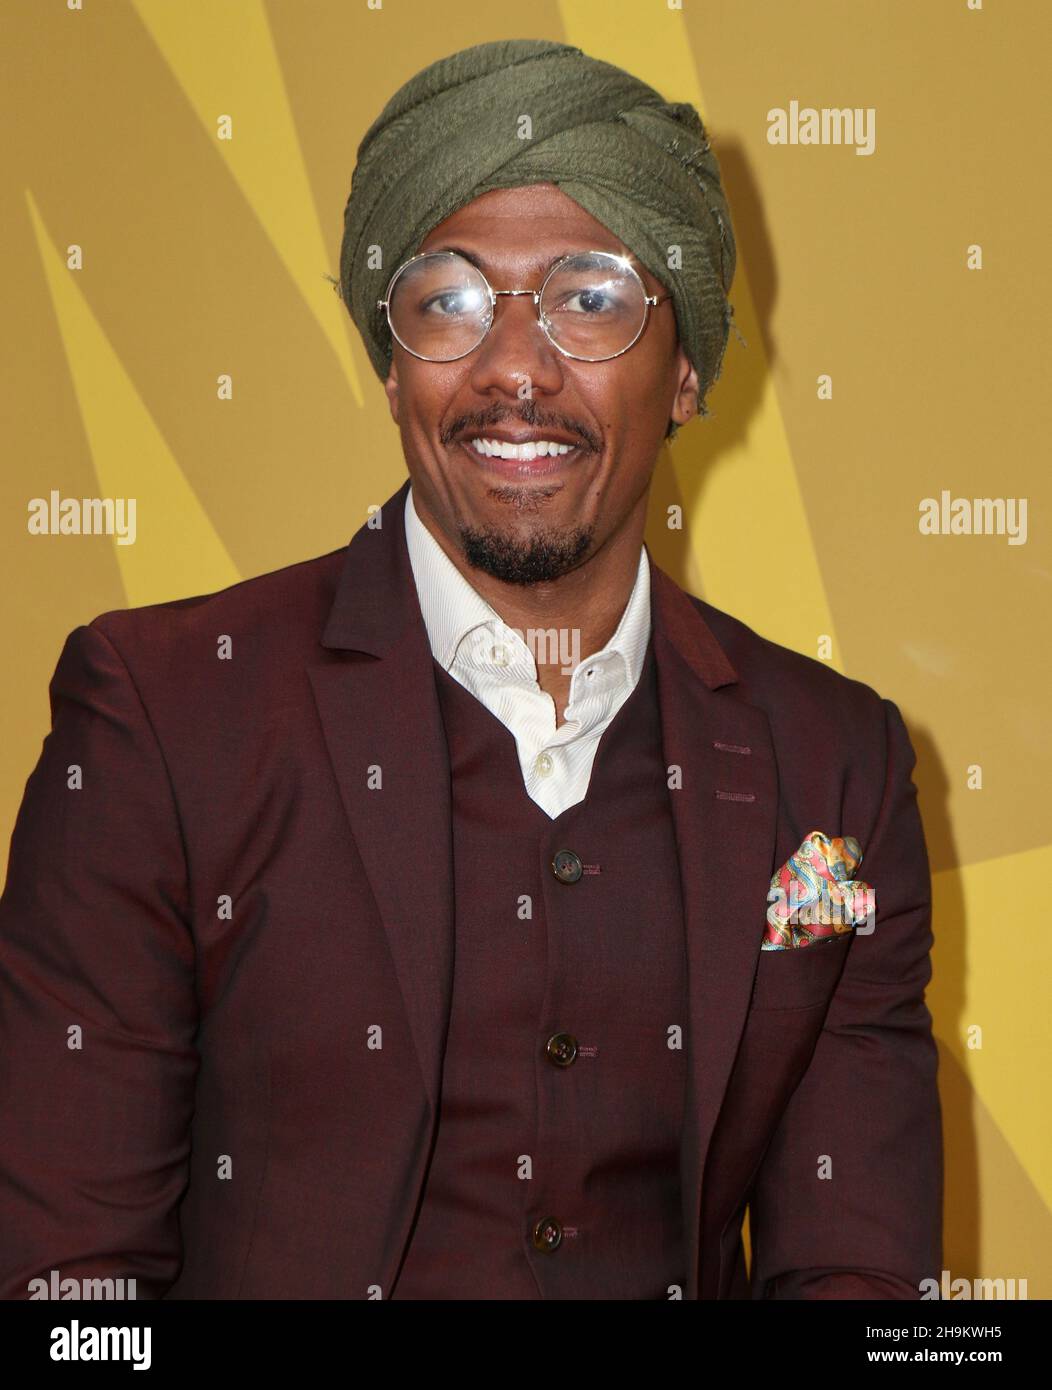 NEW YORK, NY - JUNE 26: Nick Cannon attends the 2017 NBA Awards at Basketball City - Pier 36 - South Street on June 26, 2017 in New York City.  People:  Nick Cannon Stock Photo